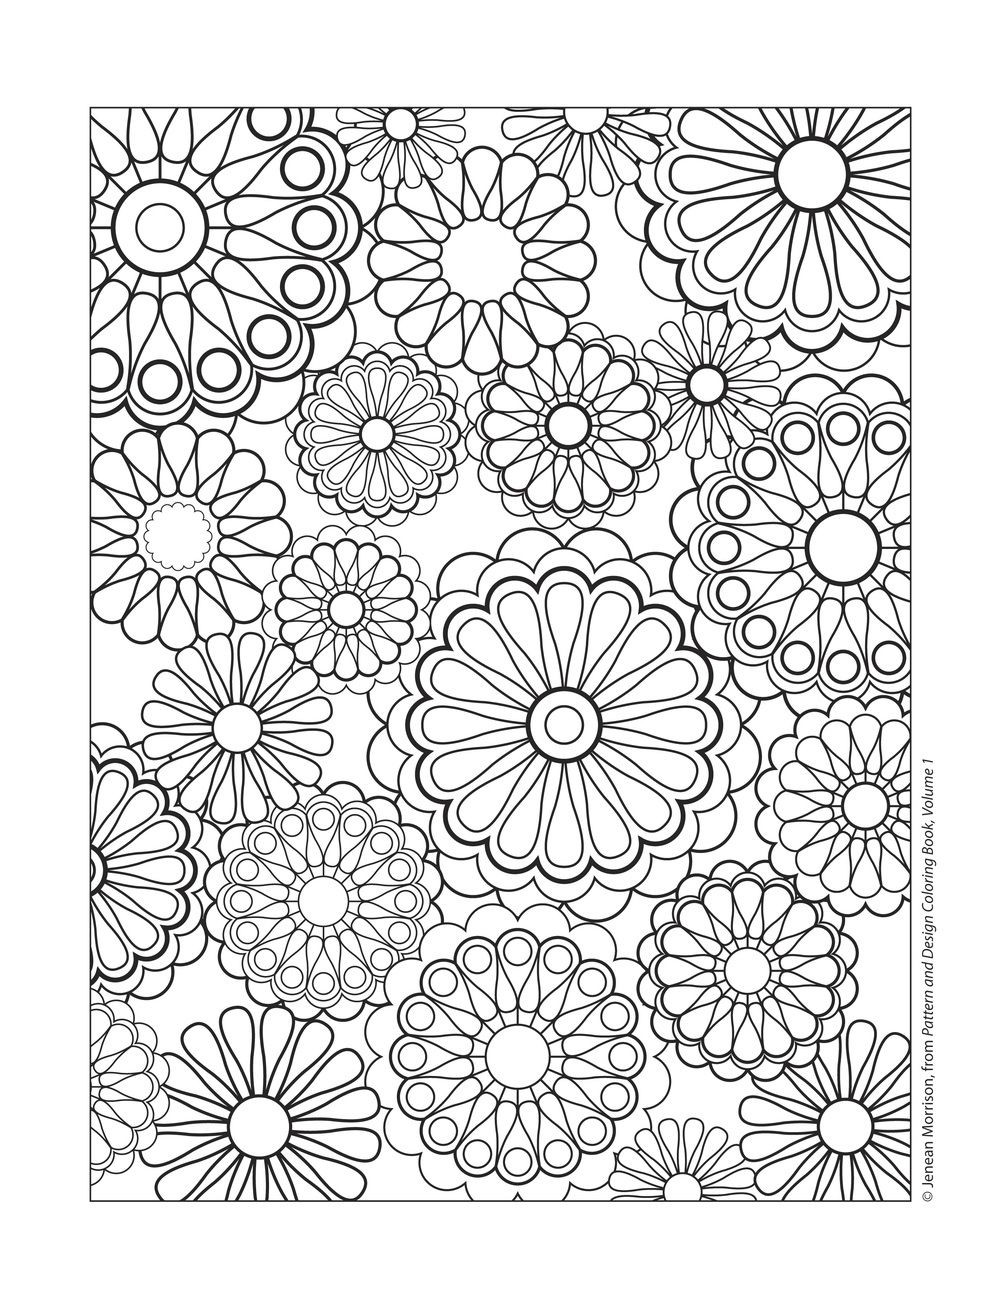 21 Great Big Flower Vases for Sale 2024 free download big flower vases for sale of cool vases flower vase coloring page pages flowers in a top i 0d intended for free colouring pages for children best design patterns coloring pages free coloring